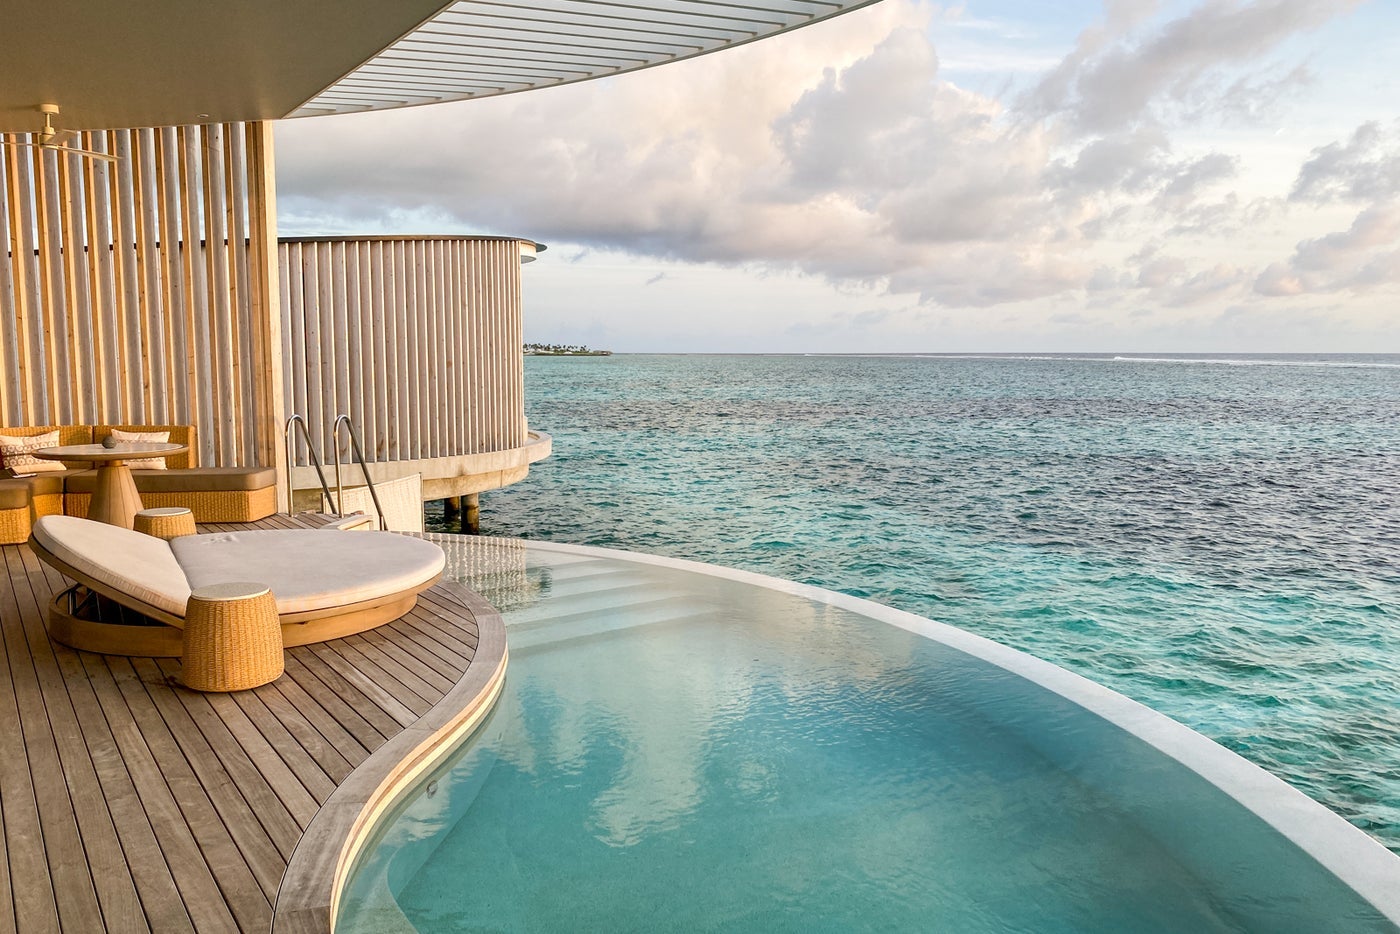 plunge pool on wooden deck overlooking clear, blue waters